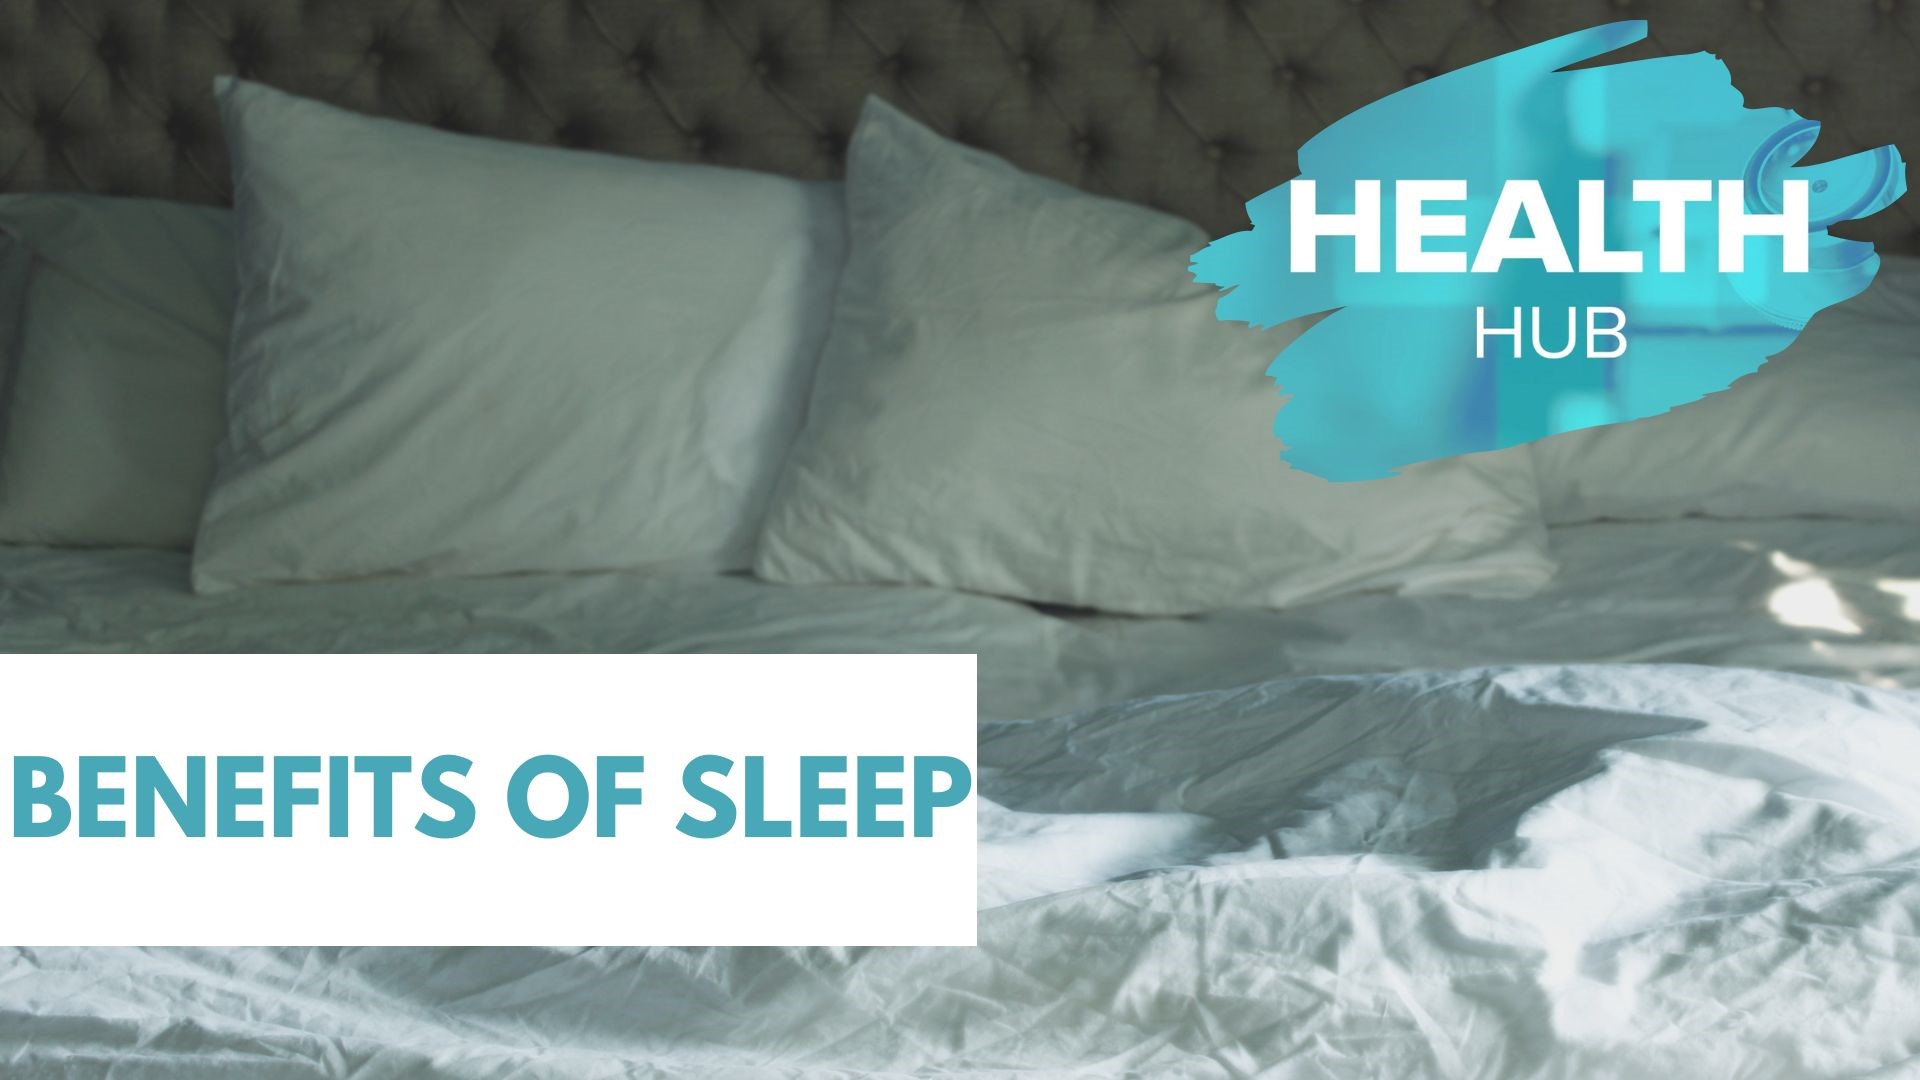 Looking into the importance of good, quality sleep and the impacts it has on your overall health and wellness.